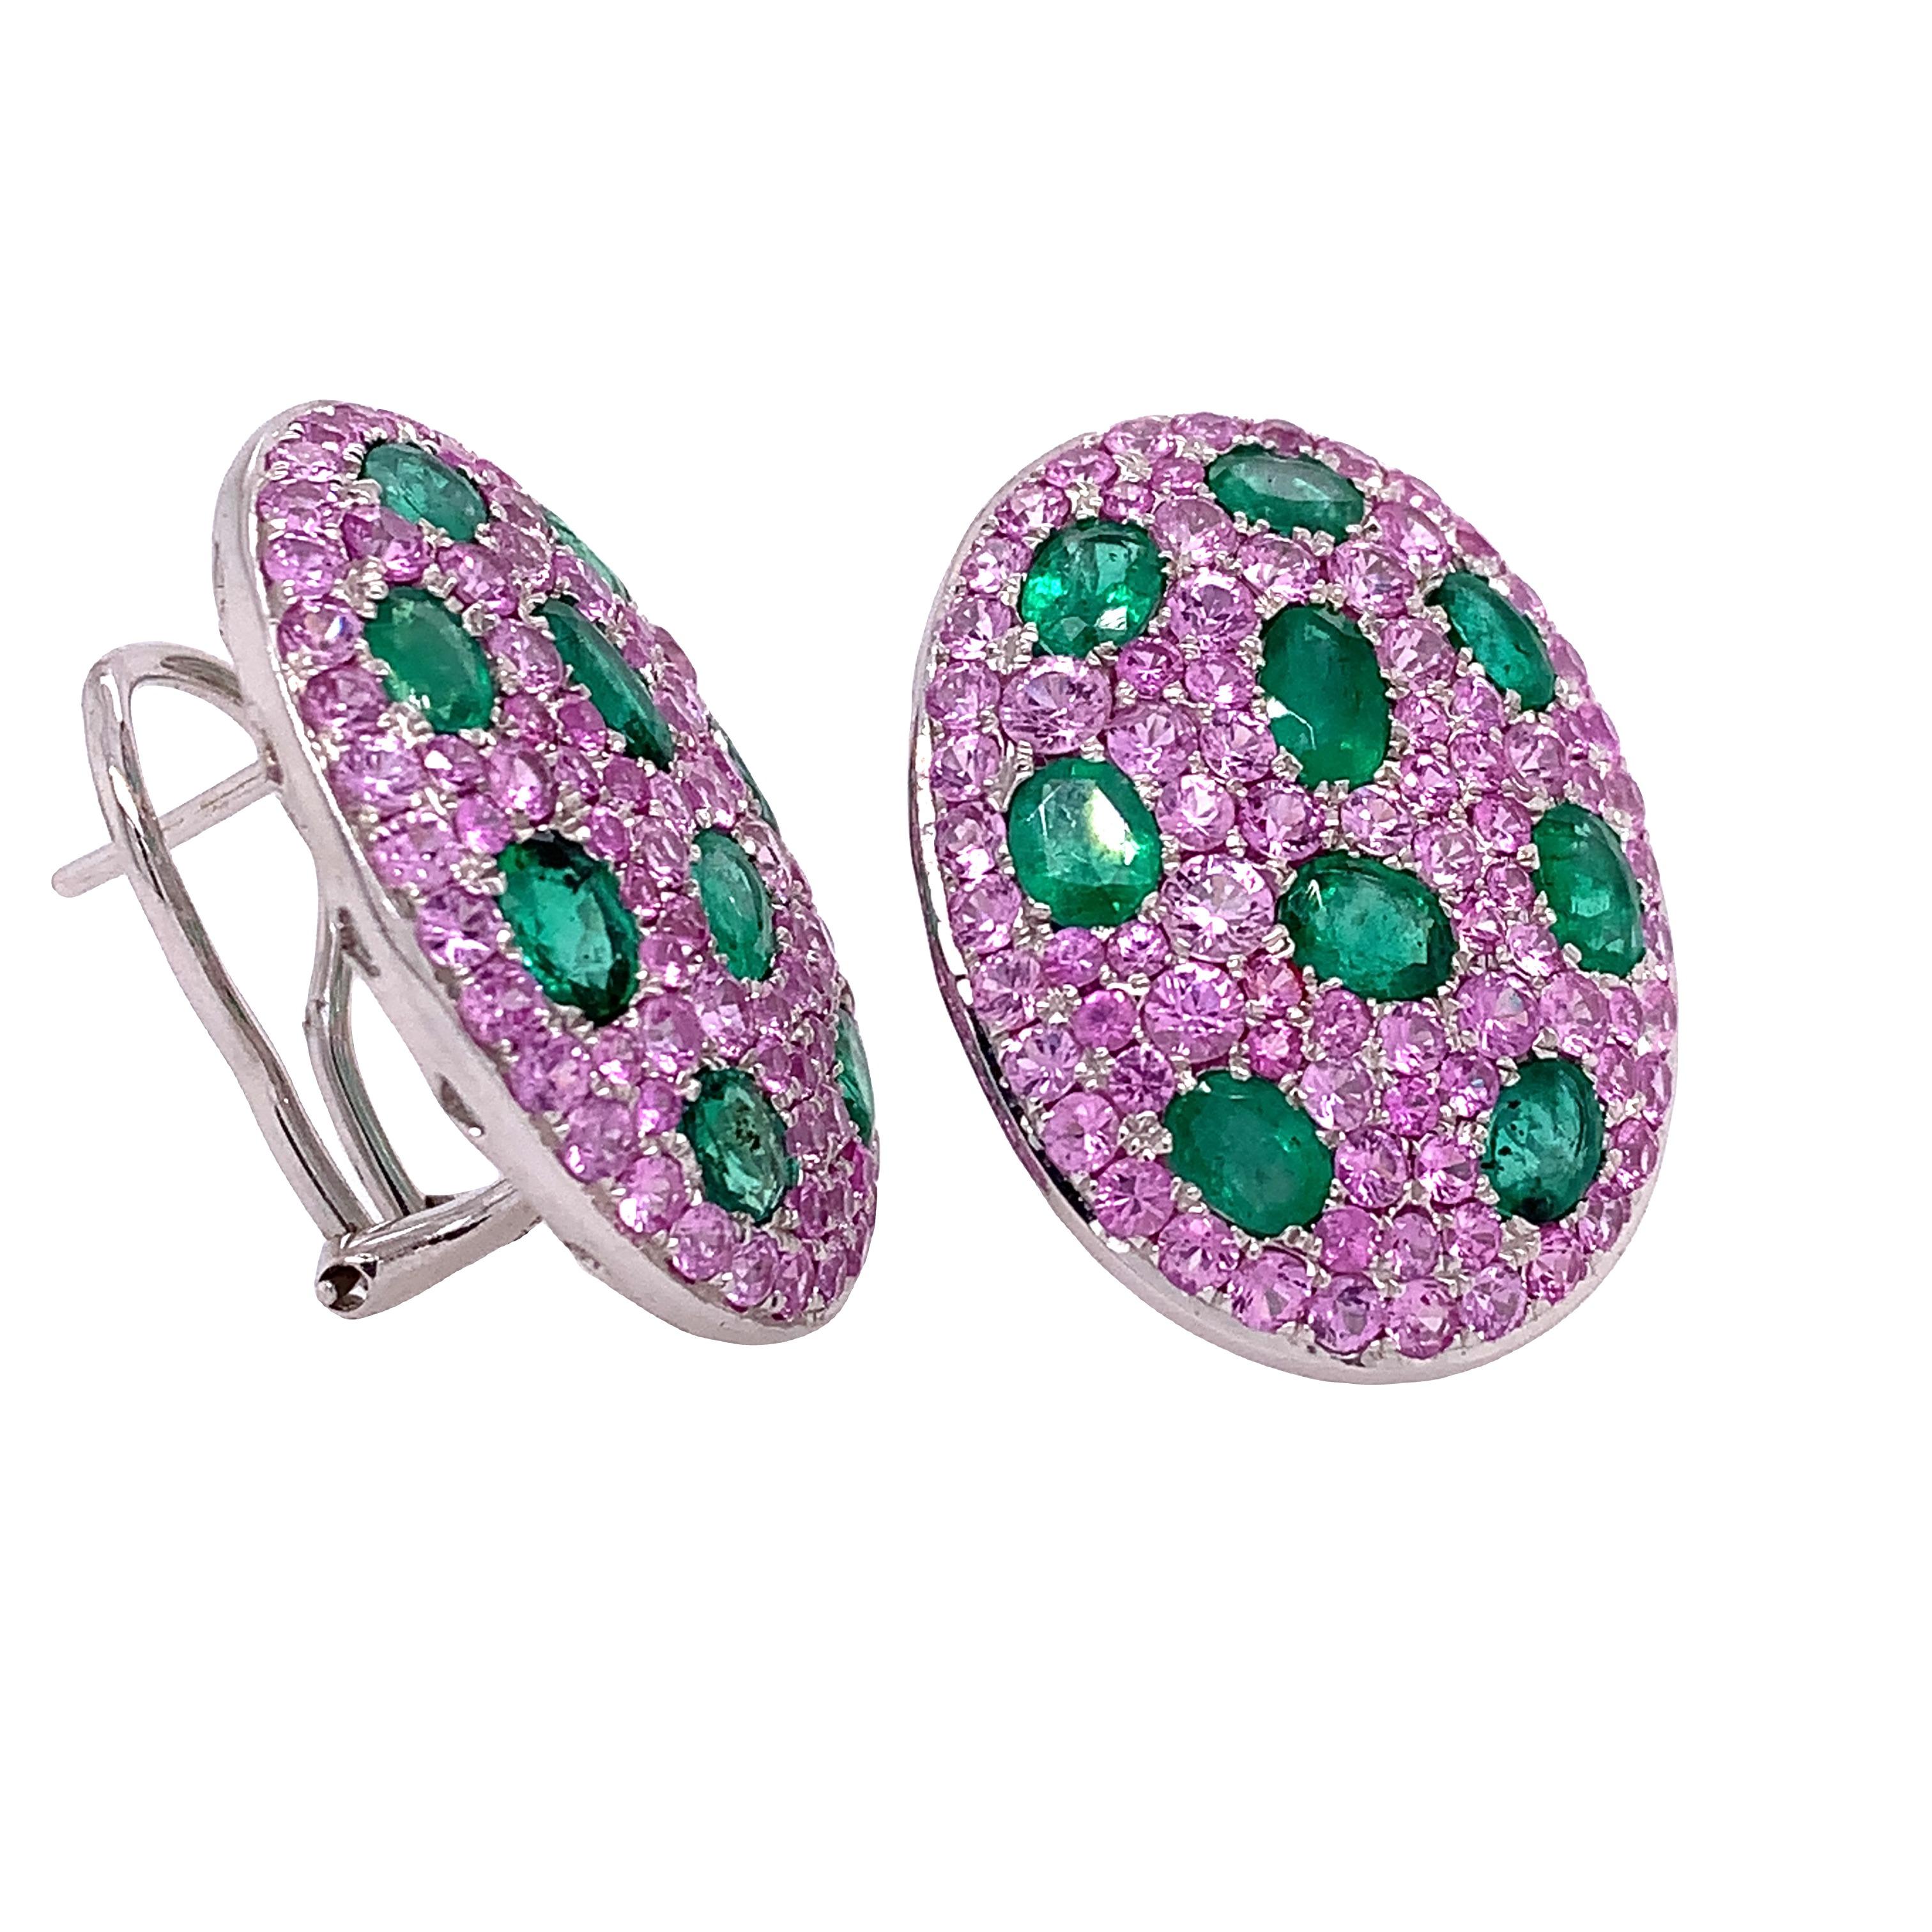 Contemporary Ruchi New York Pink Sapphire and Emerald Earring